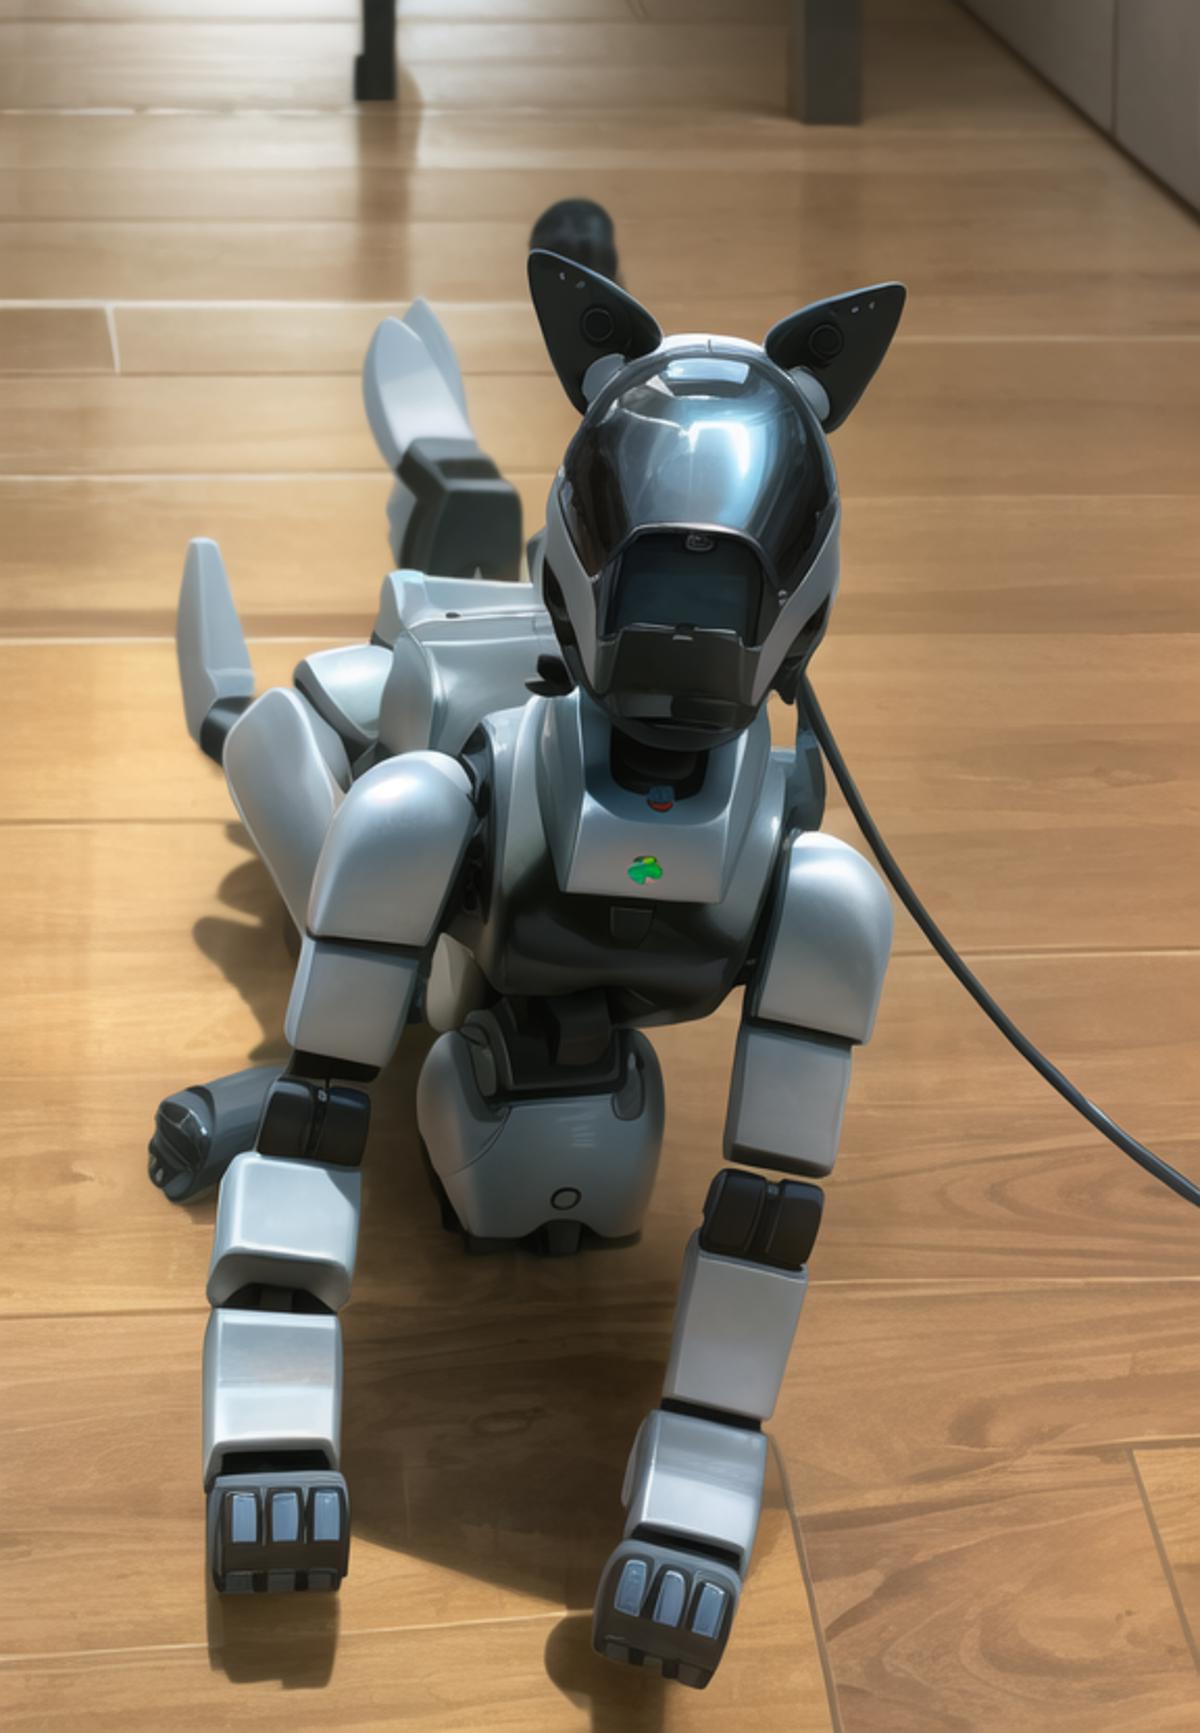 Sony AIBO ERS-210 - Sony AIBO ERS-210 | Stable Diffusion LoRA 